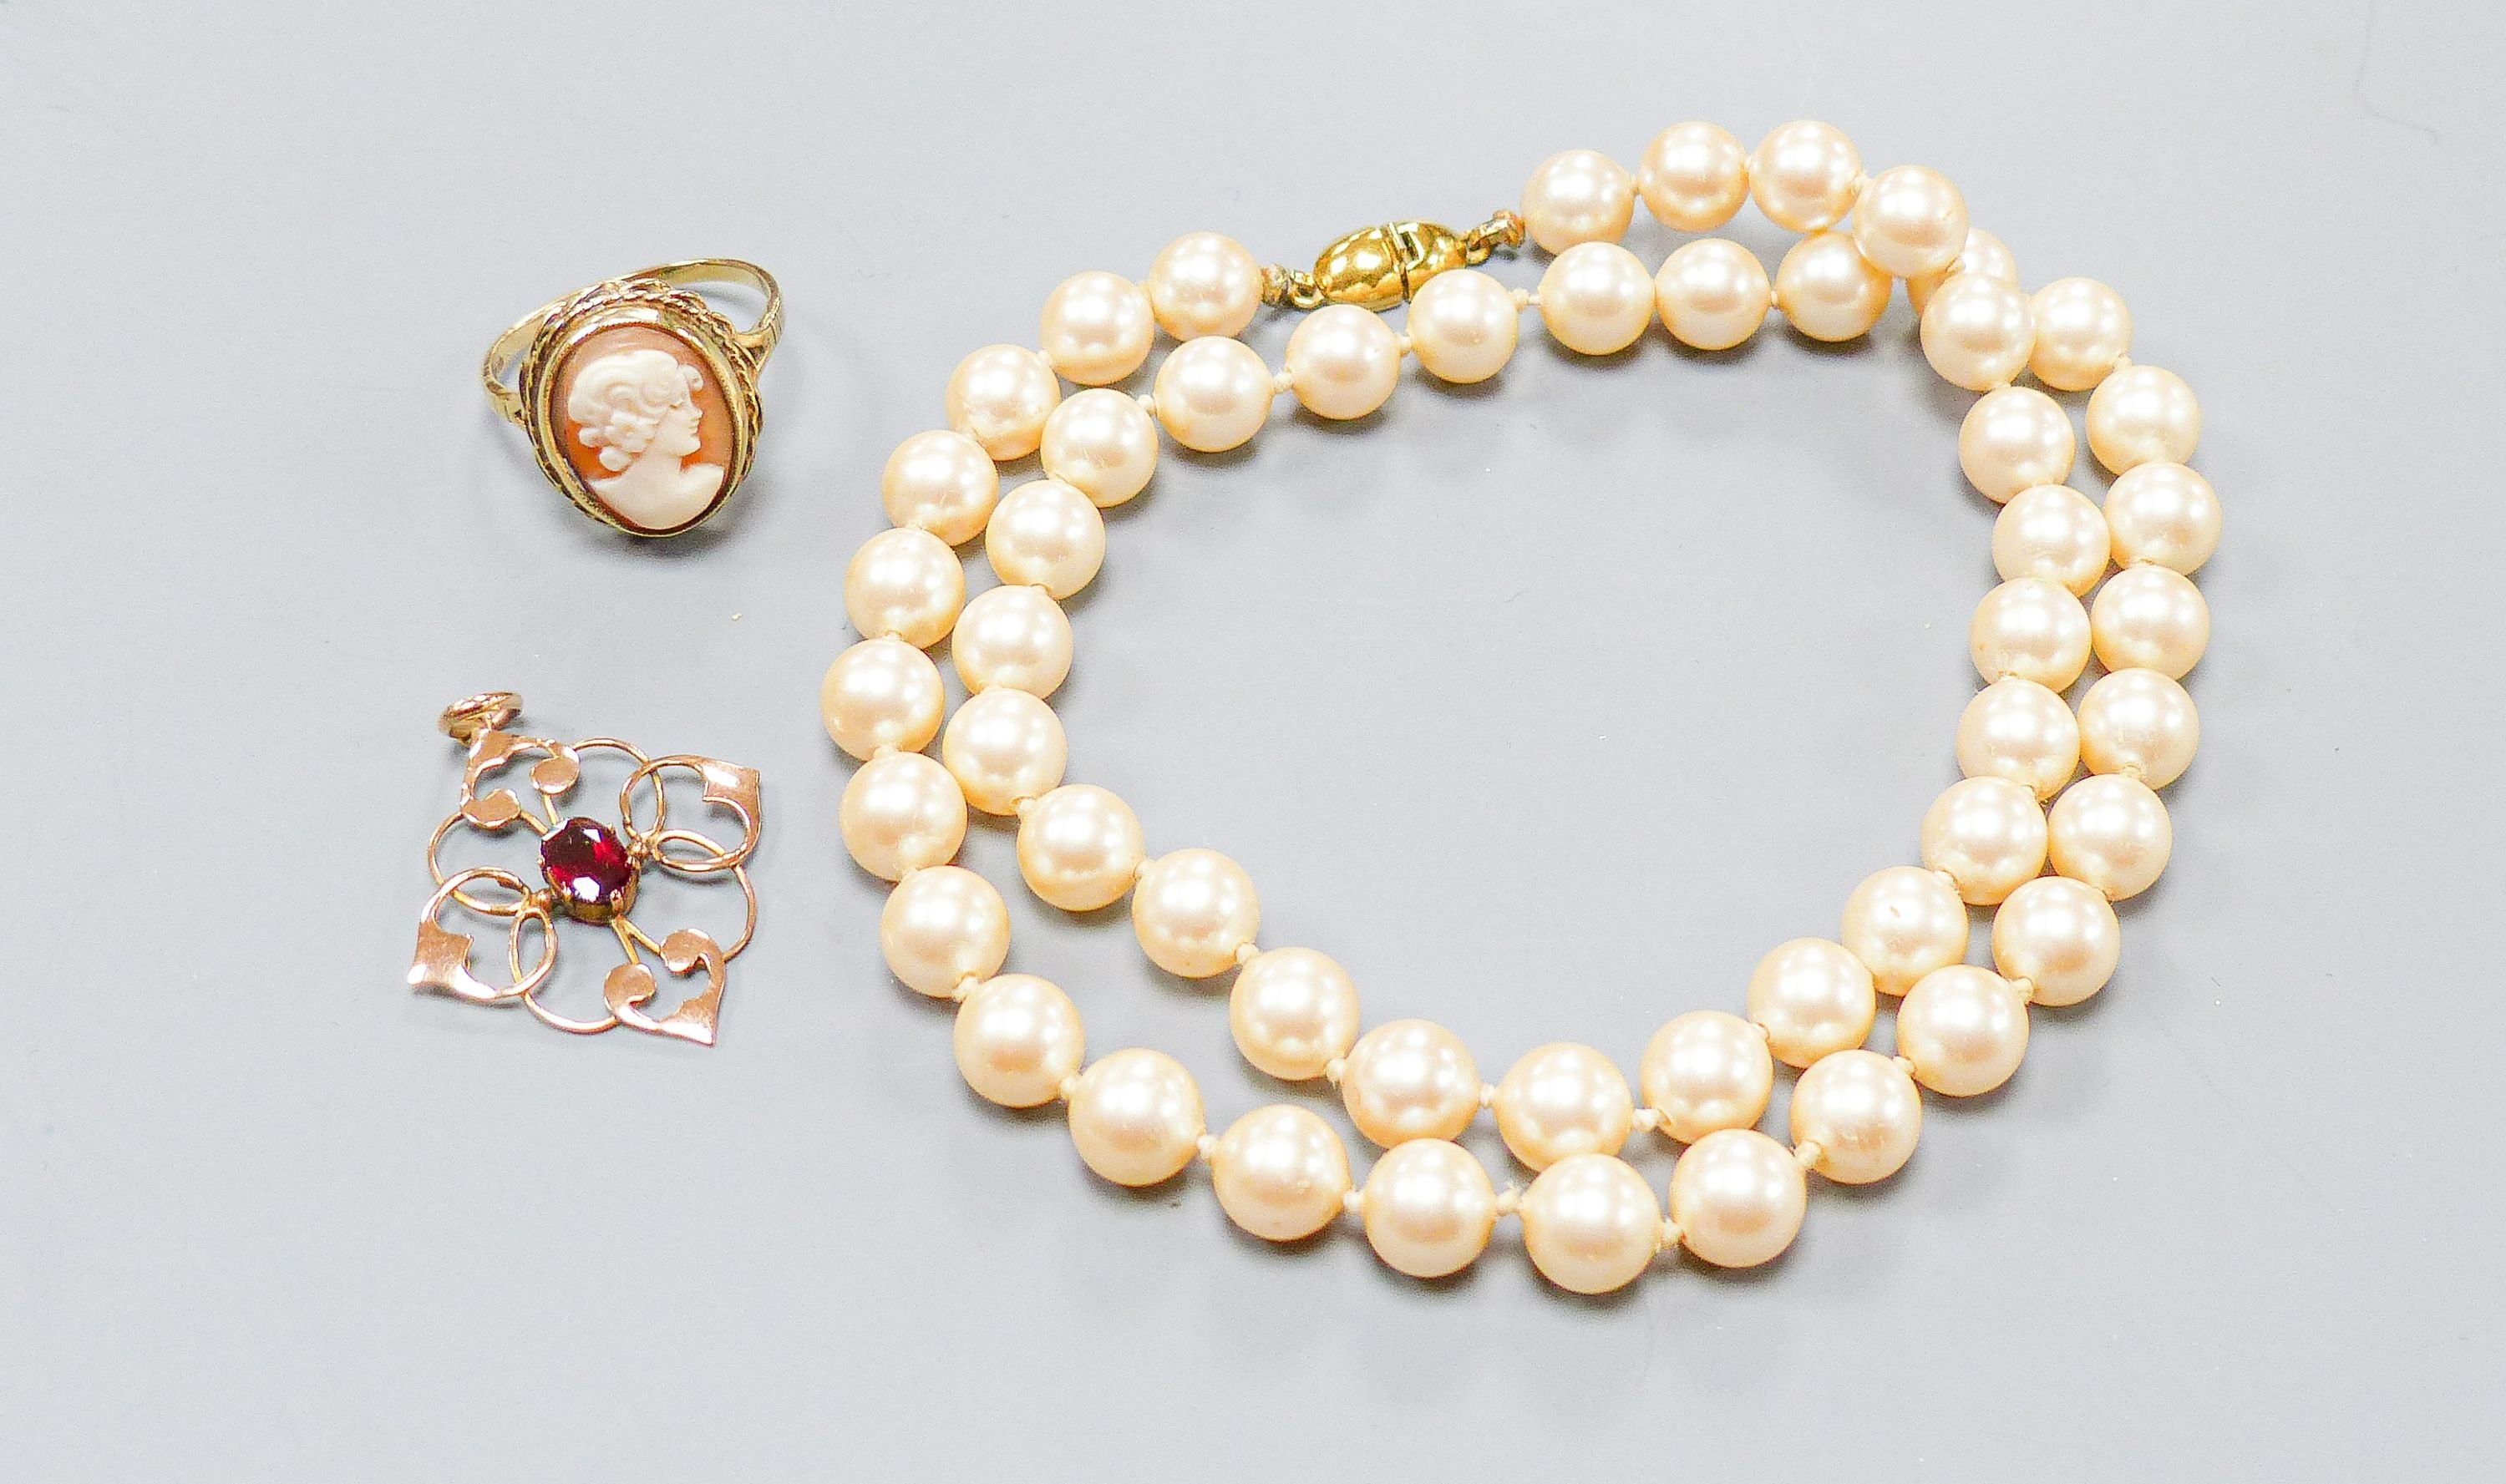 A 9ct gold and cameo shell oval ring, a 9ct and garnet set pendant and a simulated pearl necklace.